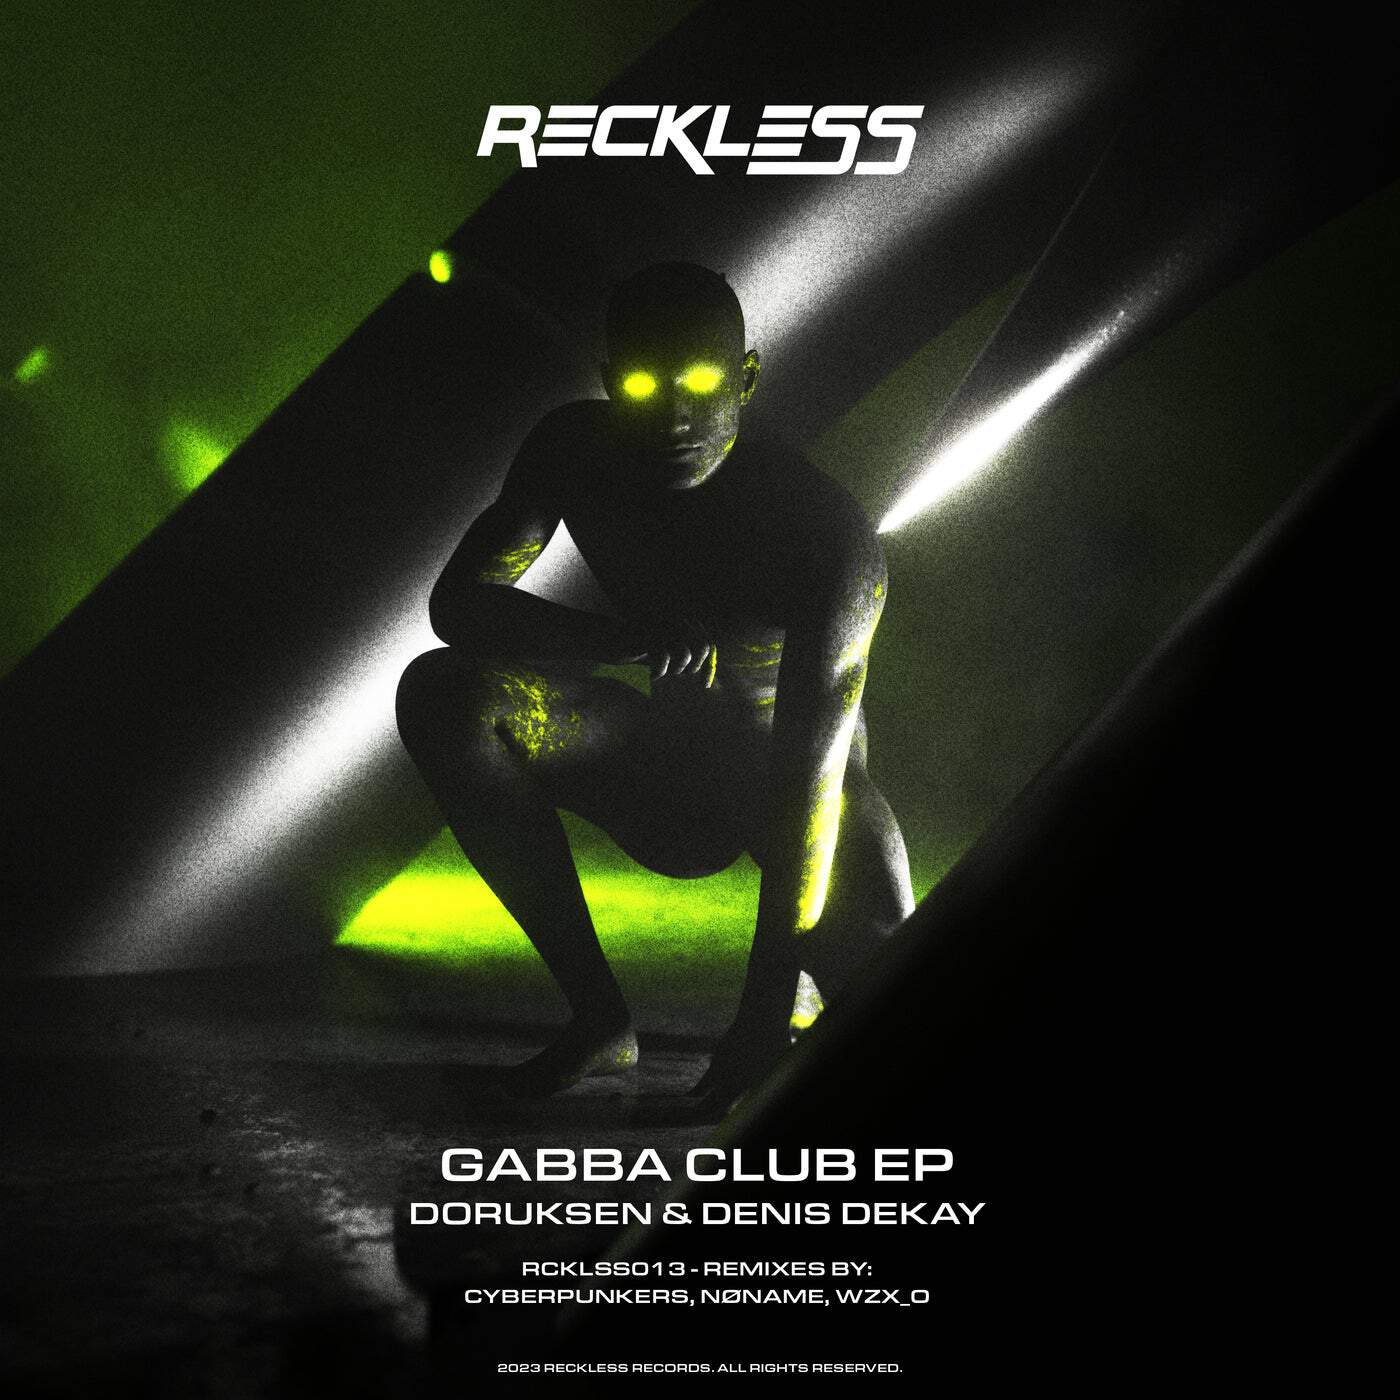 image cover: Gabba Club EP by Denis Dekay, Doruksen on Reckless